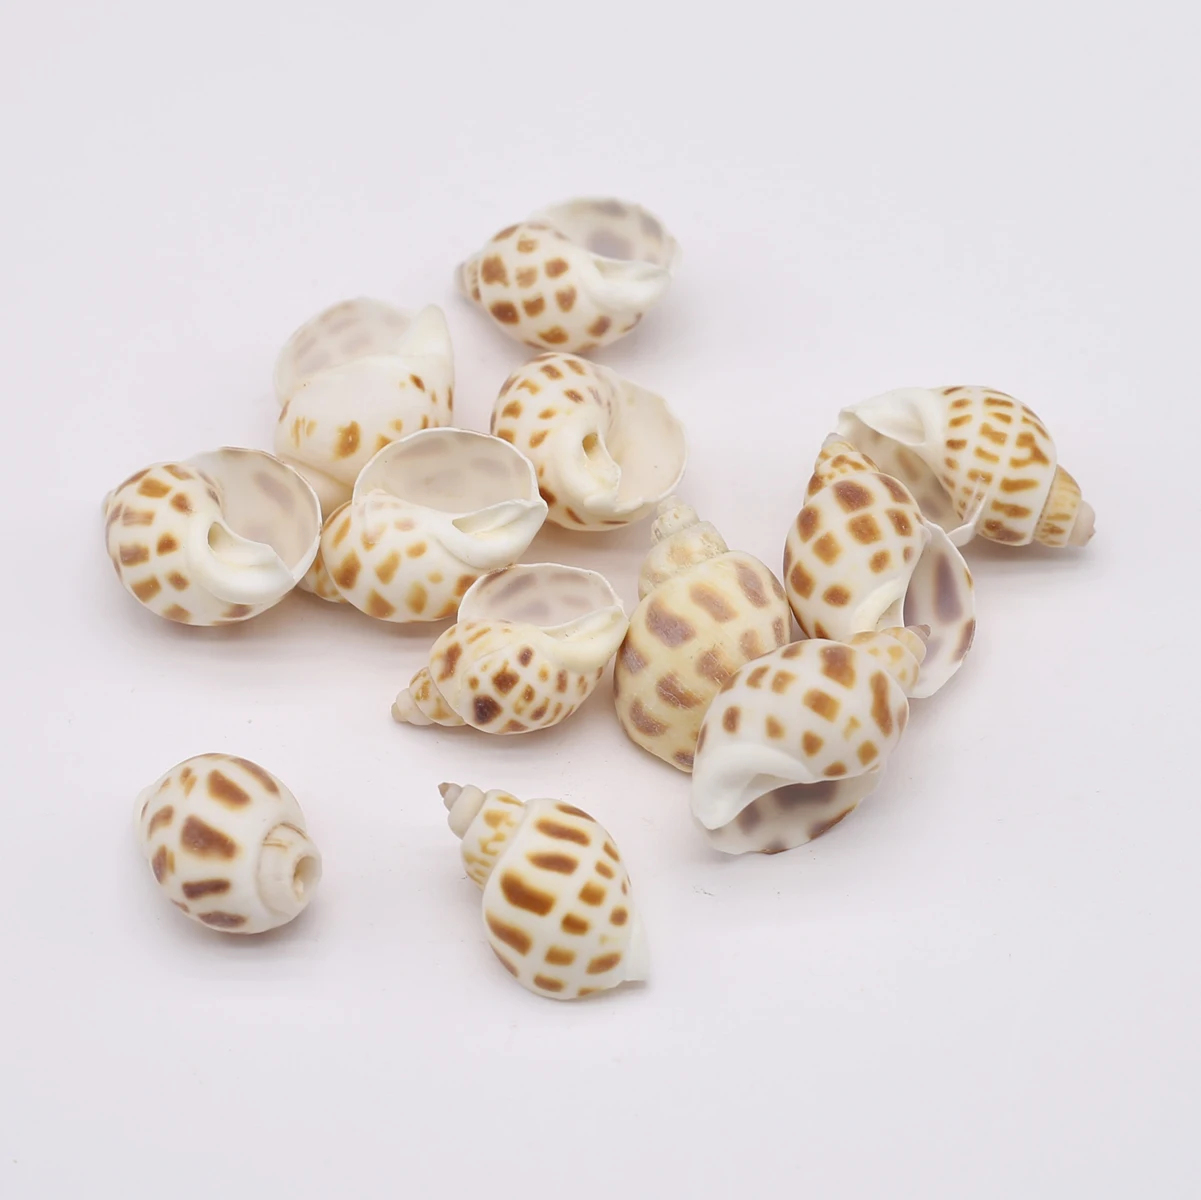 Natural Shell Beads No Hole Sea Yellow Decor Snail Charms for Jewelry Making Necklace Bracelet Gift Ornament